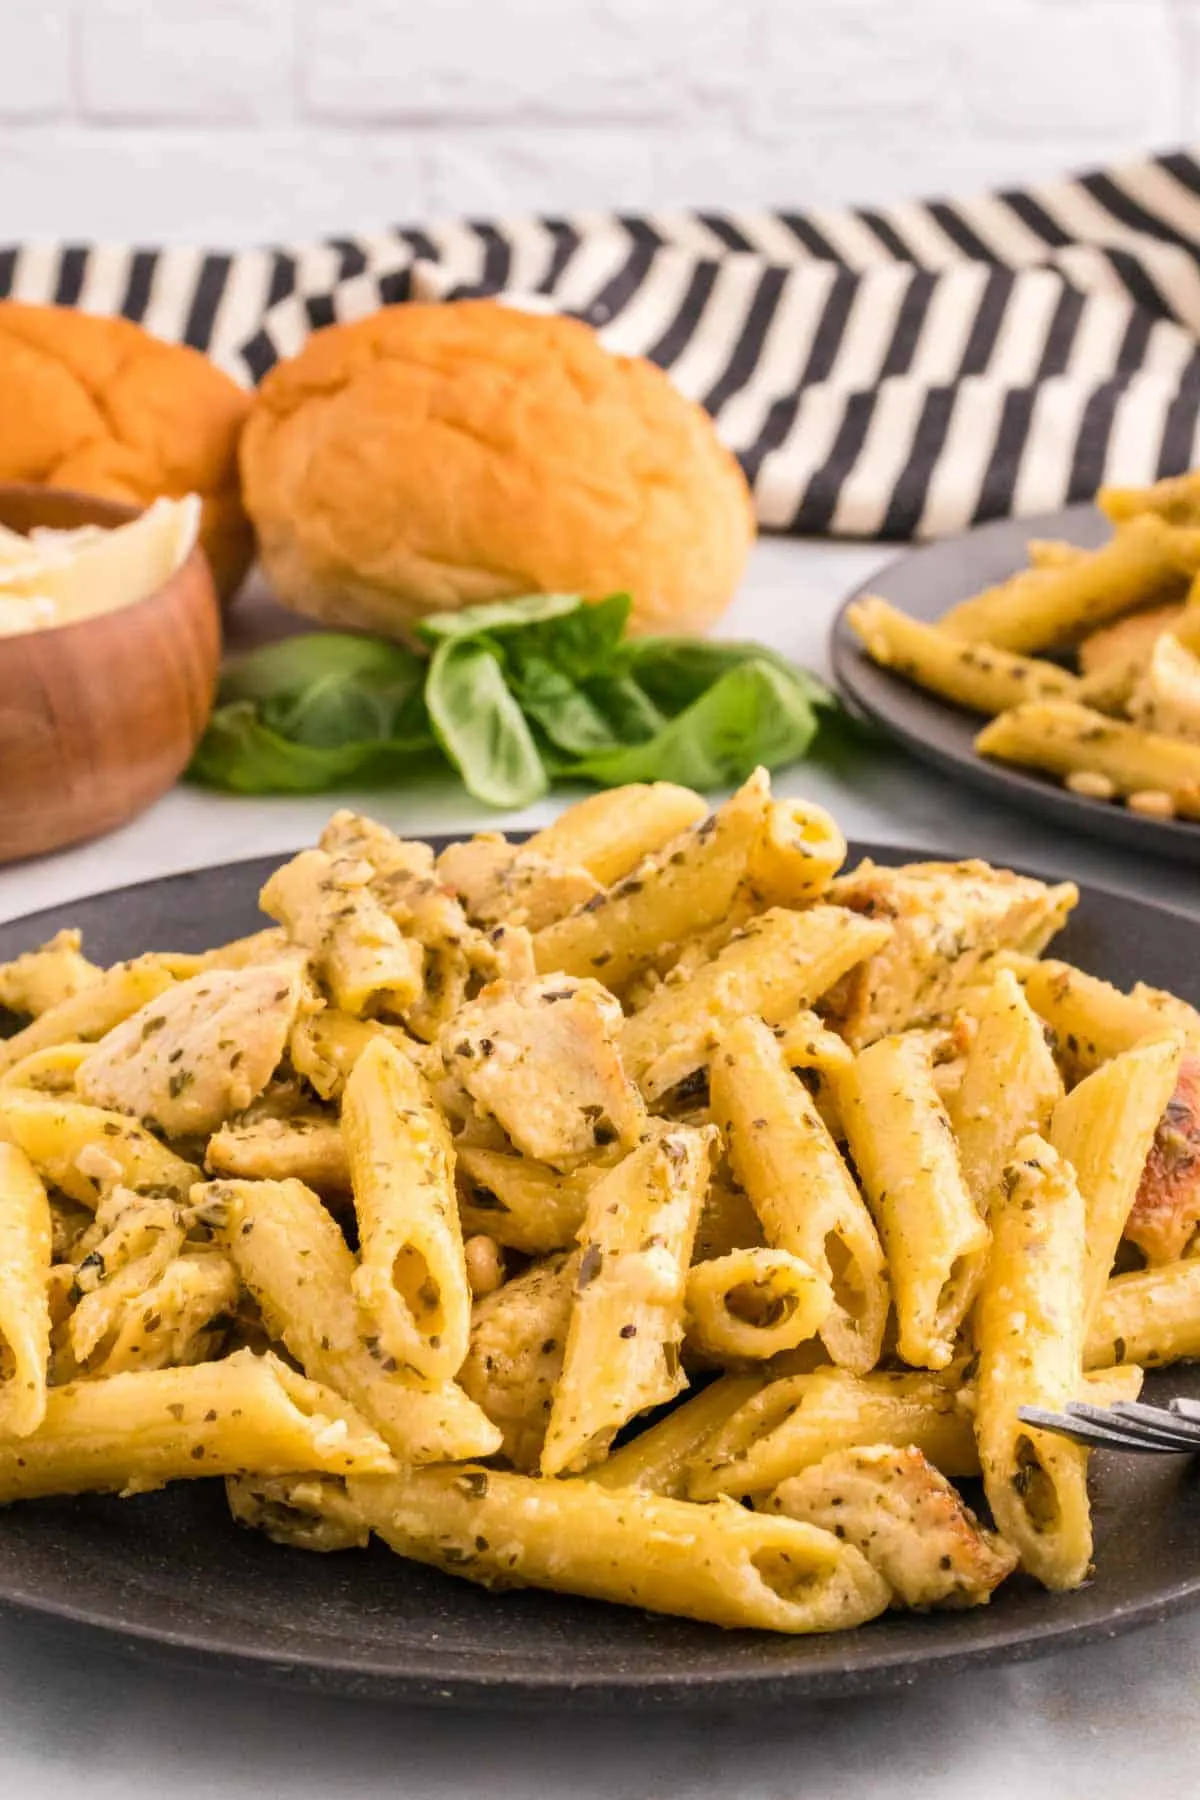 Pesto Chicken Pasta is a flavourful pasta recipe loaded with seasoned chicken breast chunks, basil pesto, heavy cream and topped with roasted pine nuts.